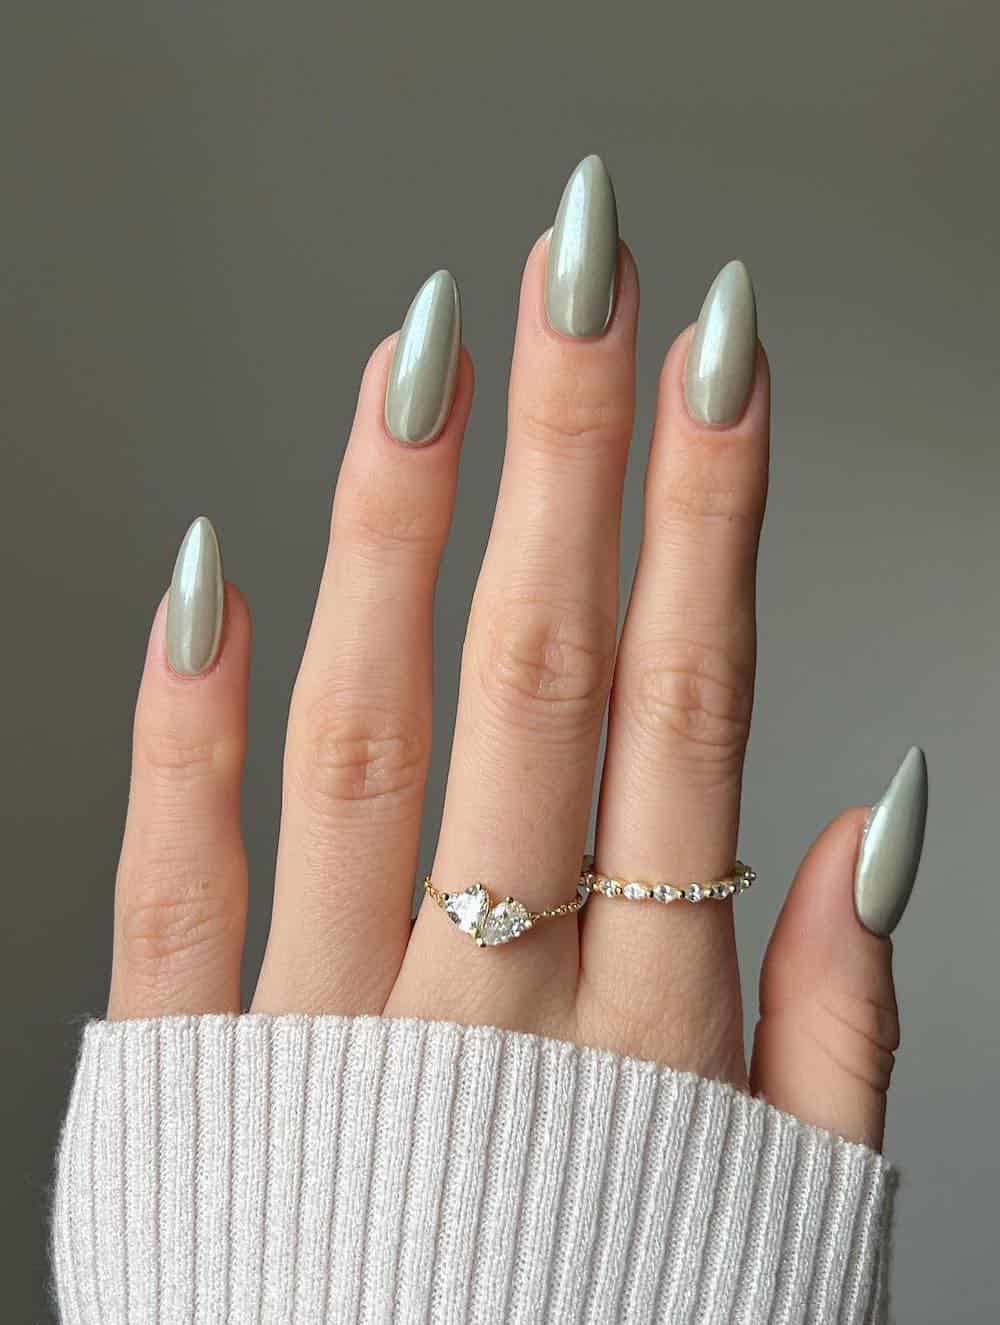 A hand with long almond nails painted a soft sage chrome